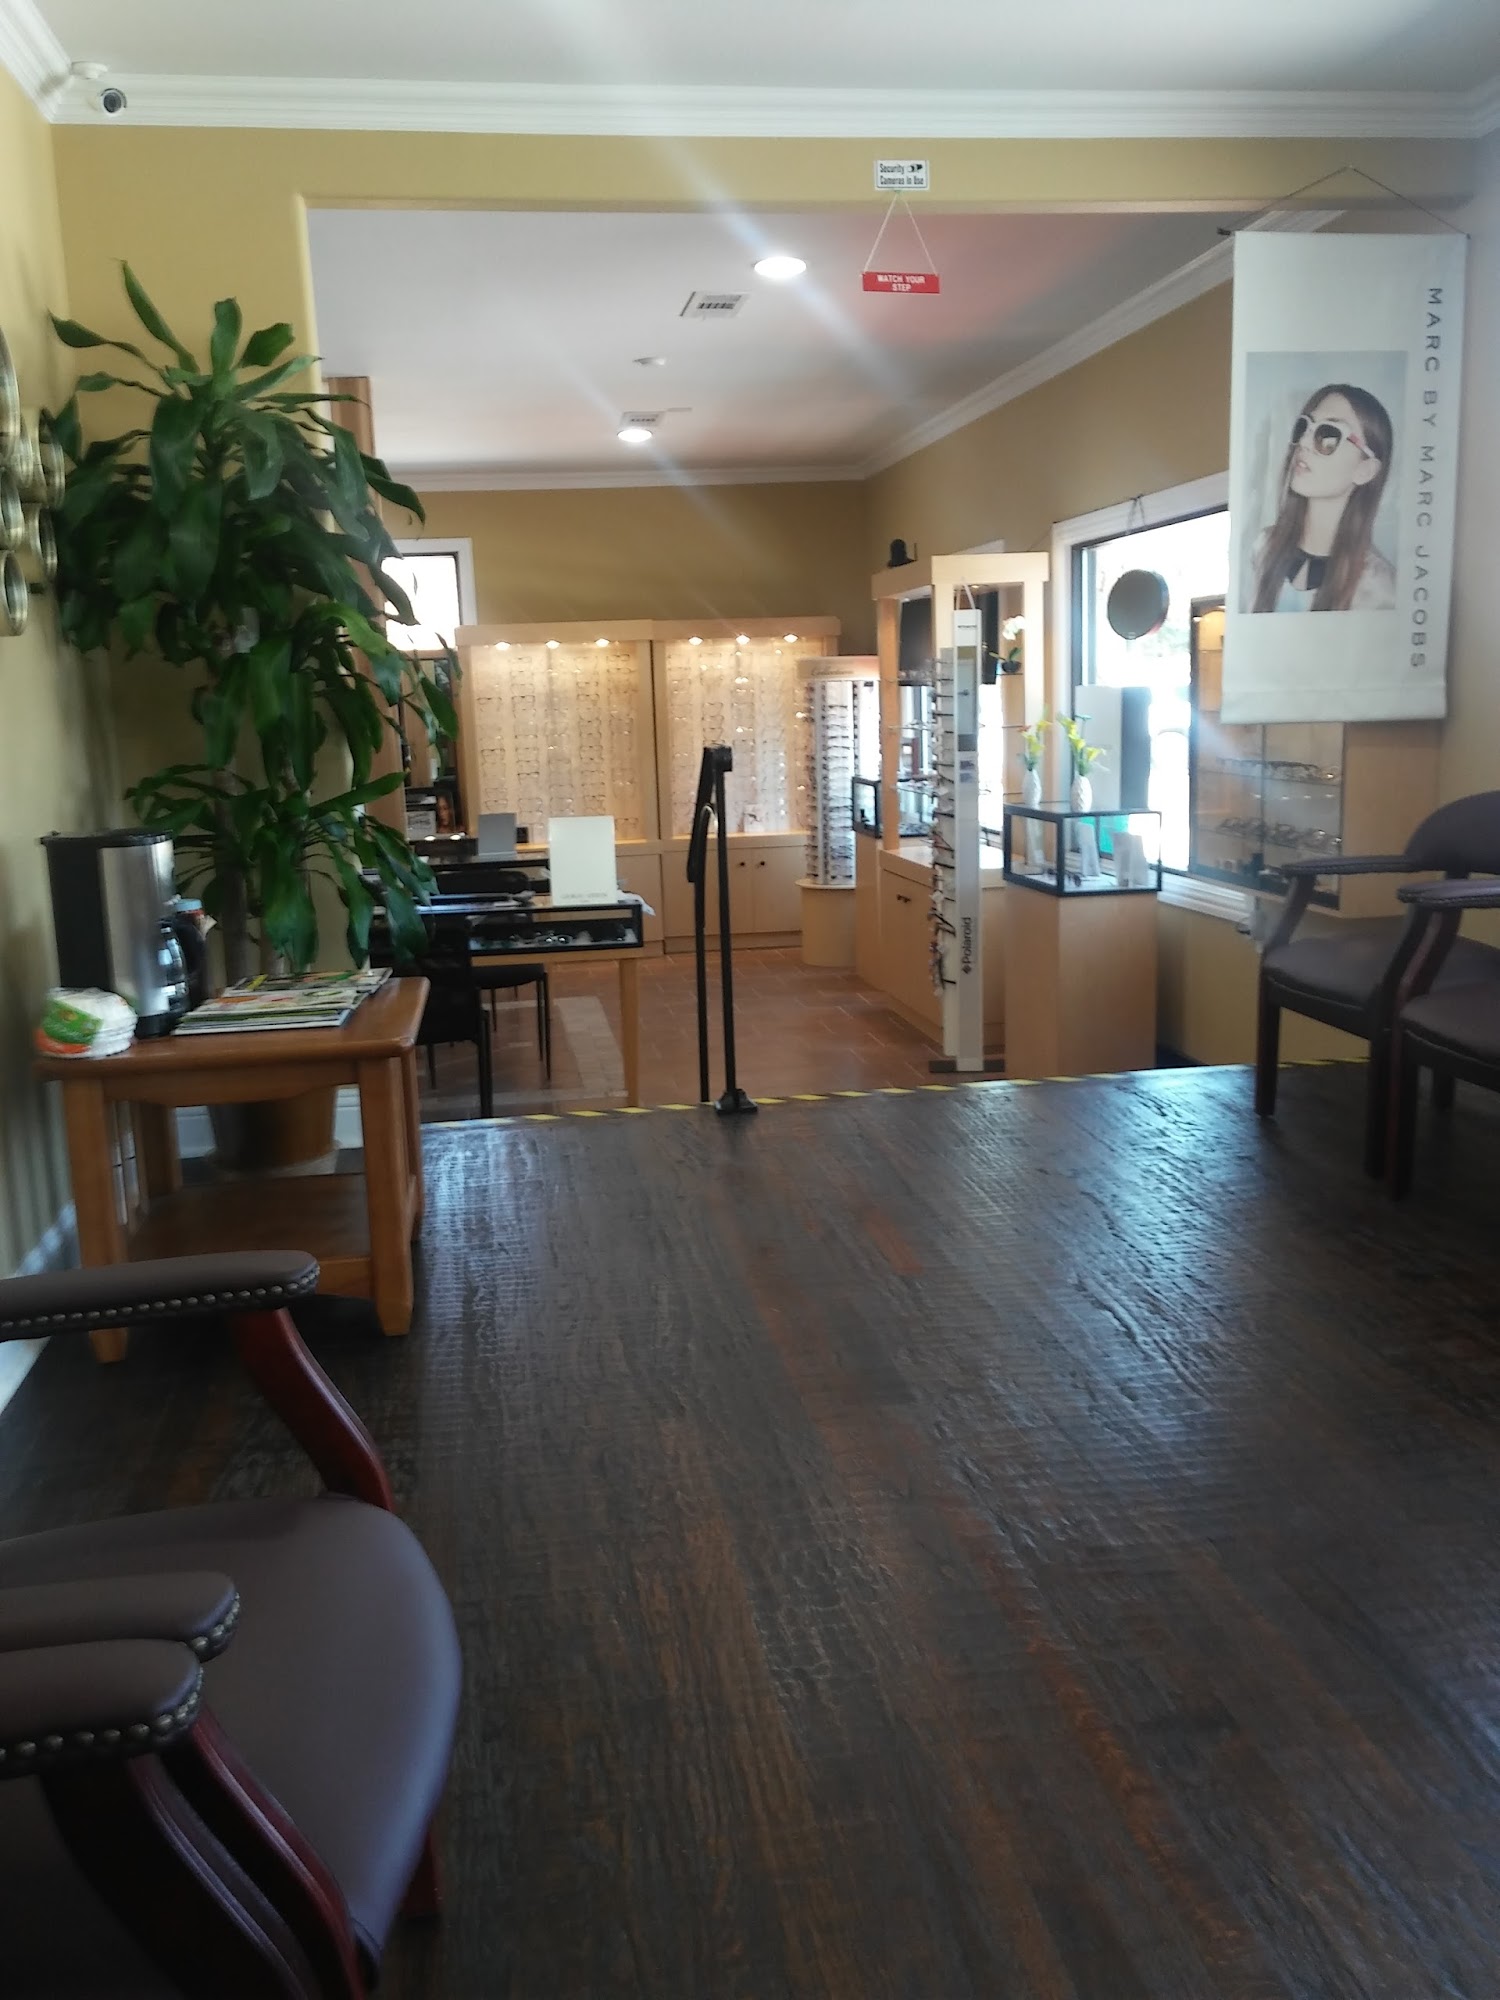 Ideal Eyecare & Optical 7216 Glenview Dr, Richland Hills Texas 76180